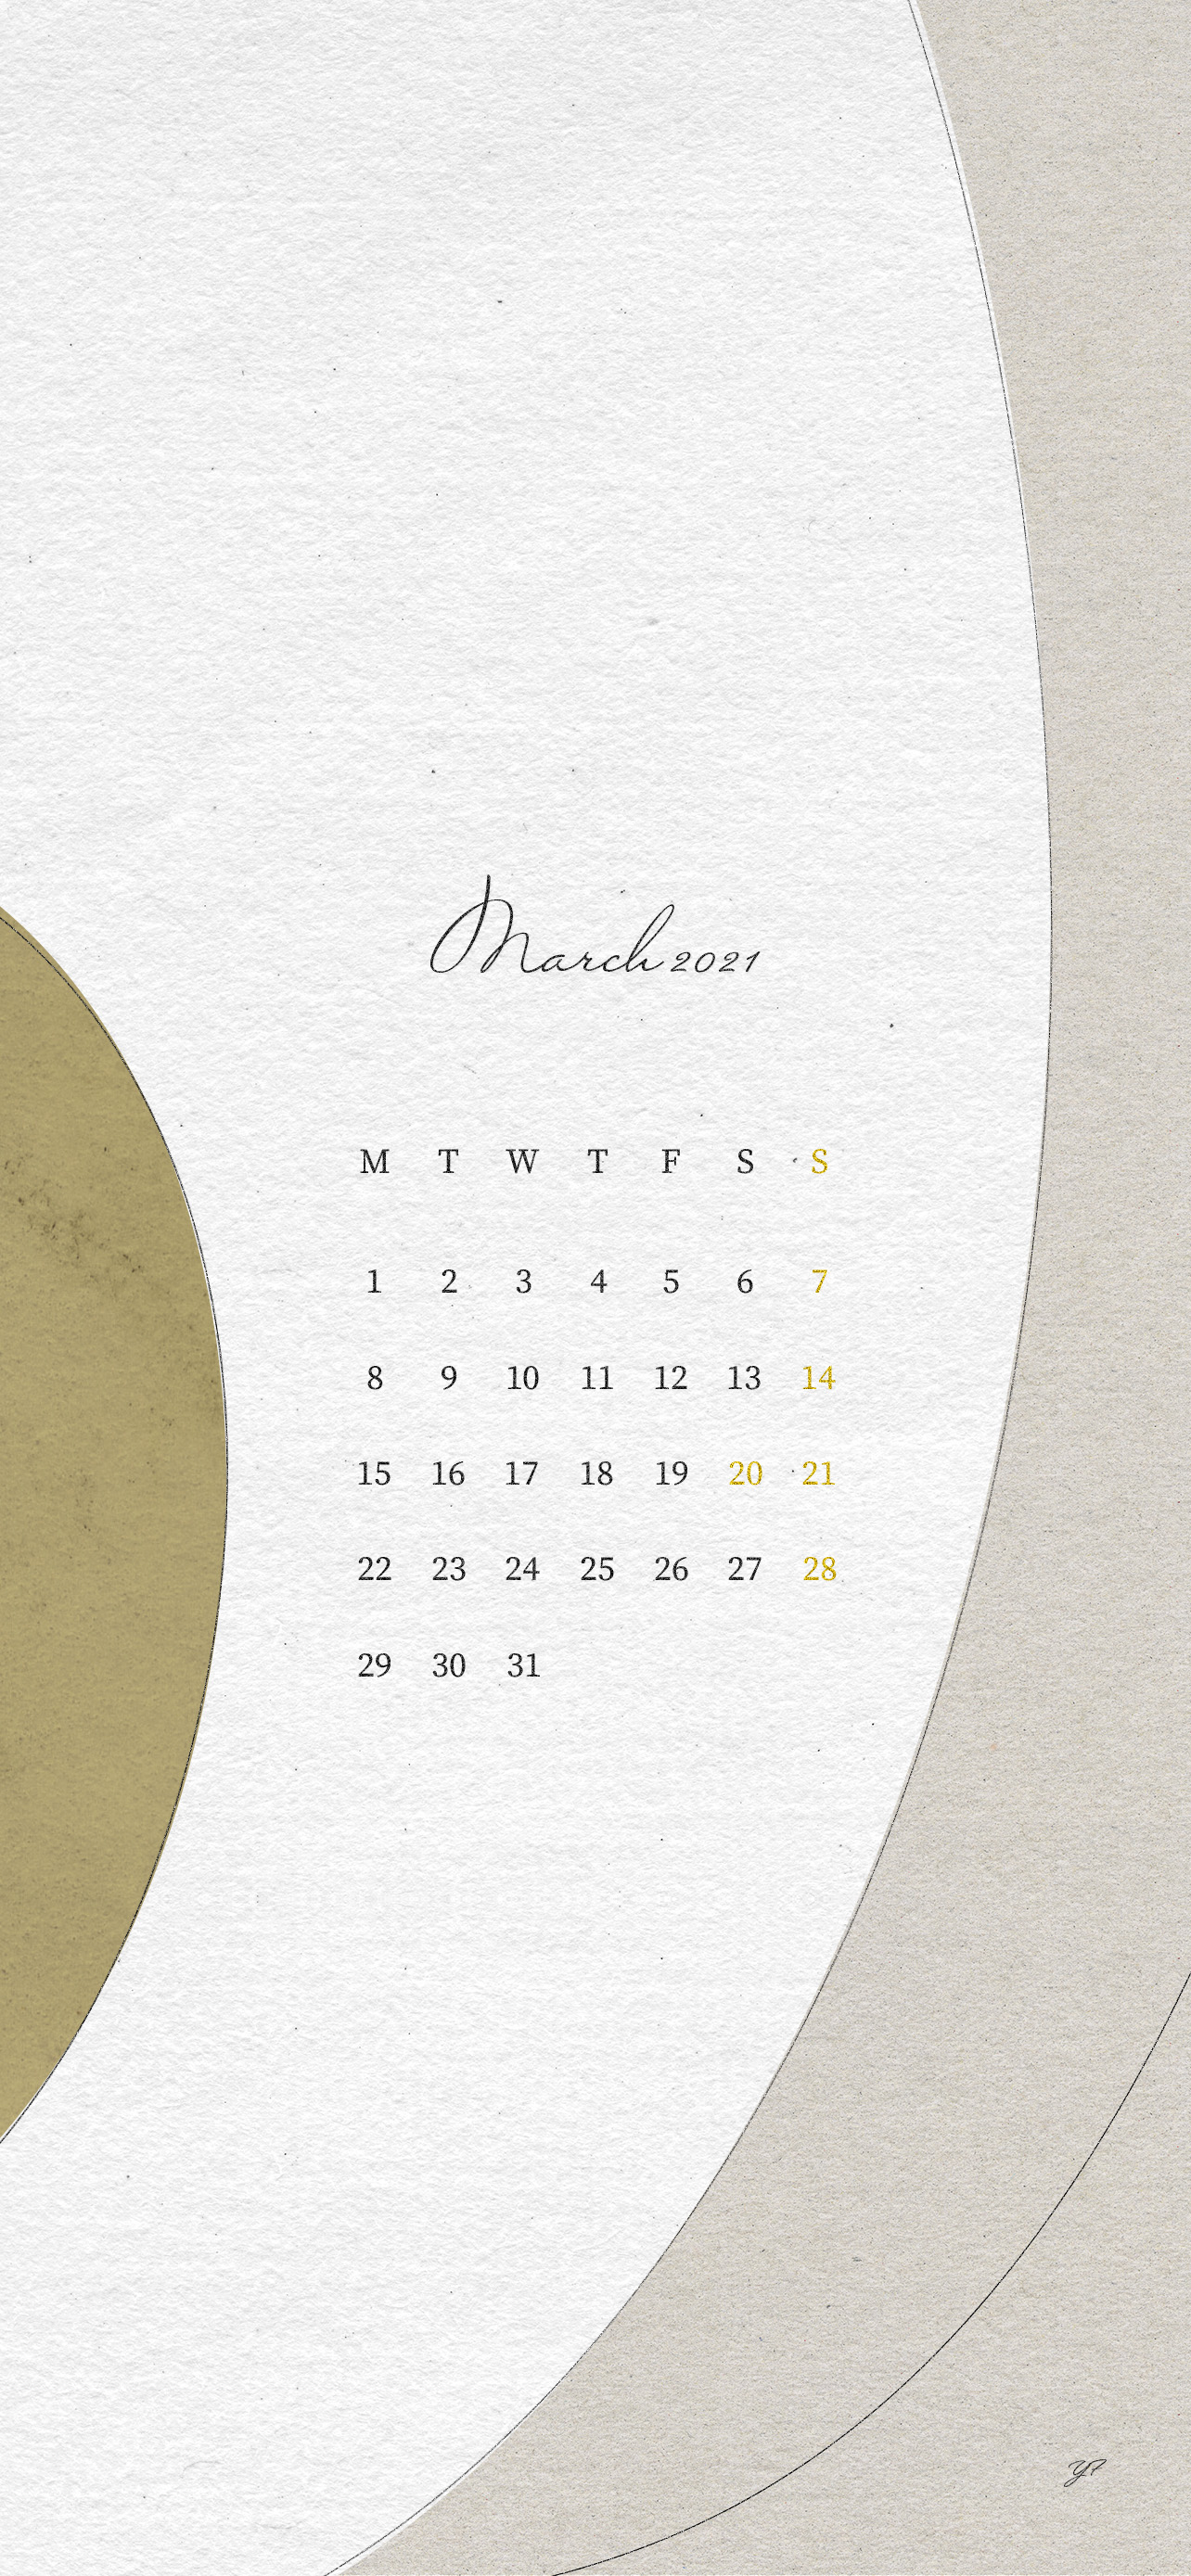 March 21 Calendar Wallpaper For The Iphone Design By Yf